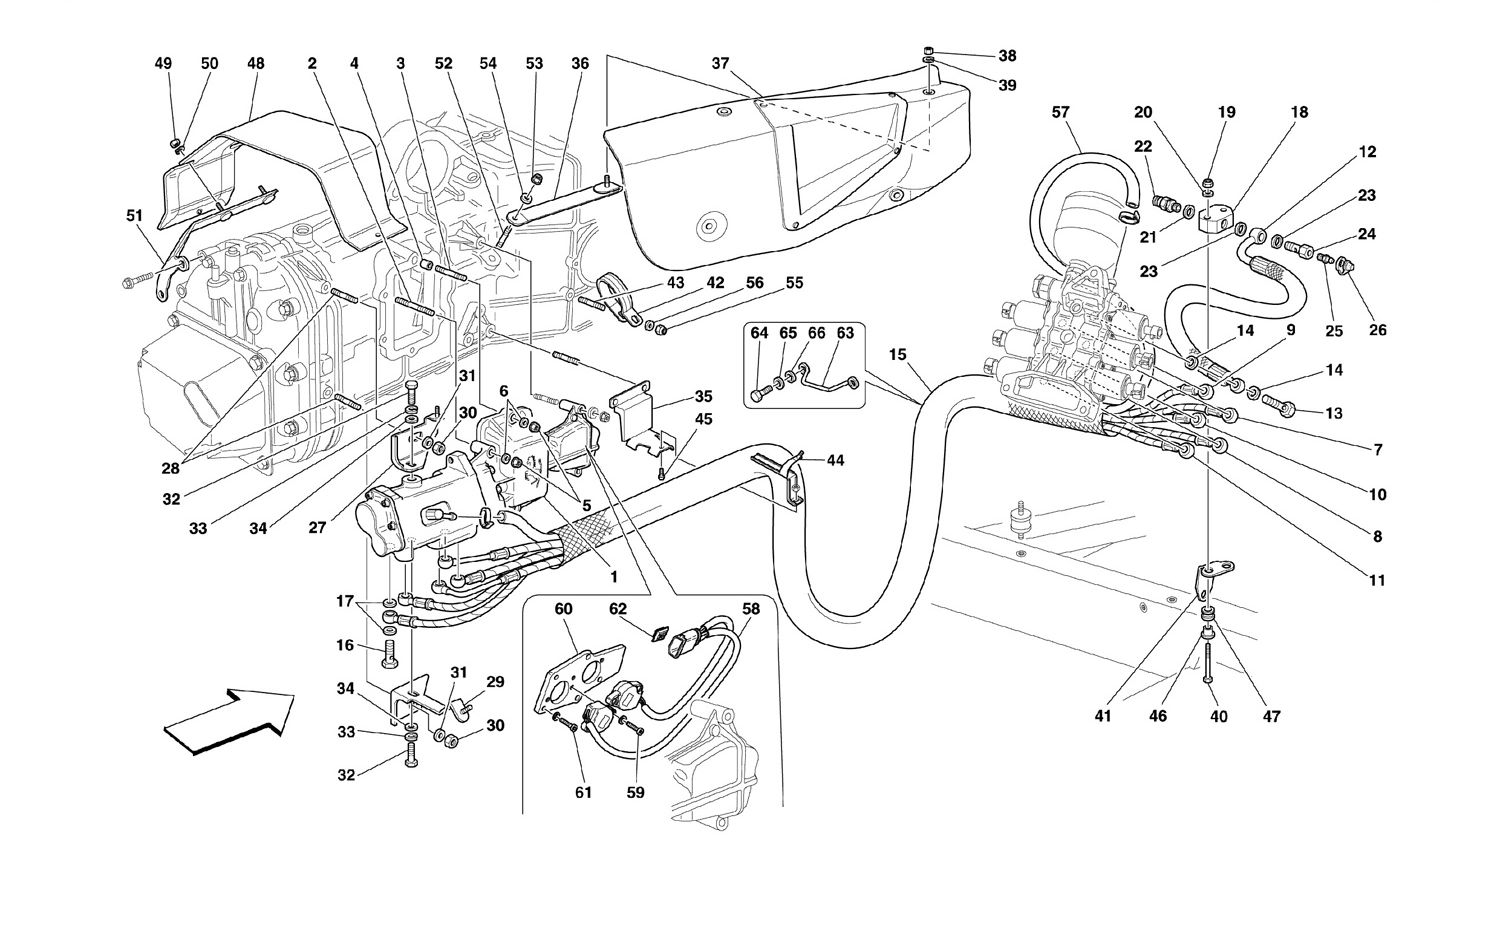 Schematic: F1 Clutch And Gearbox Hydraulic Control -Valid For F1-